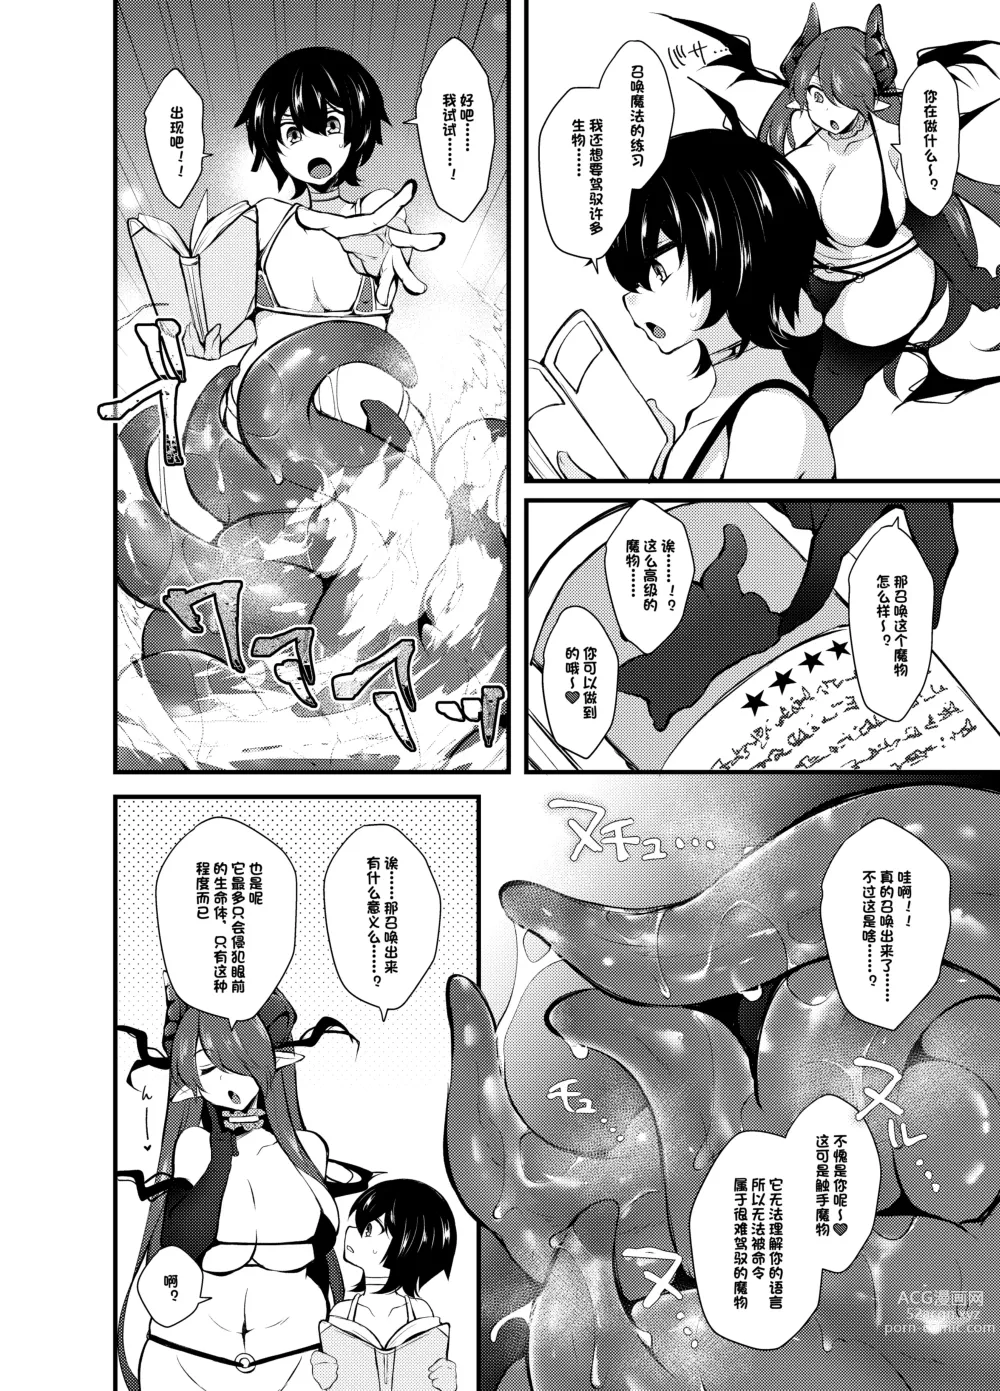 Page 13 of doujinshi I, a witch who got kicked out of the party, learned summoning magic and made a contract with the strongest succubus